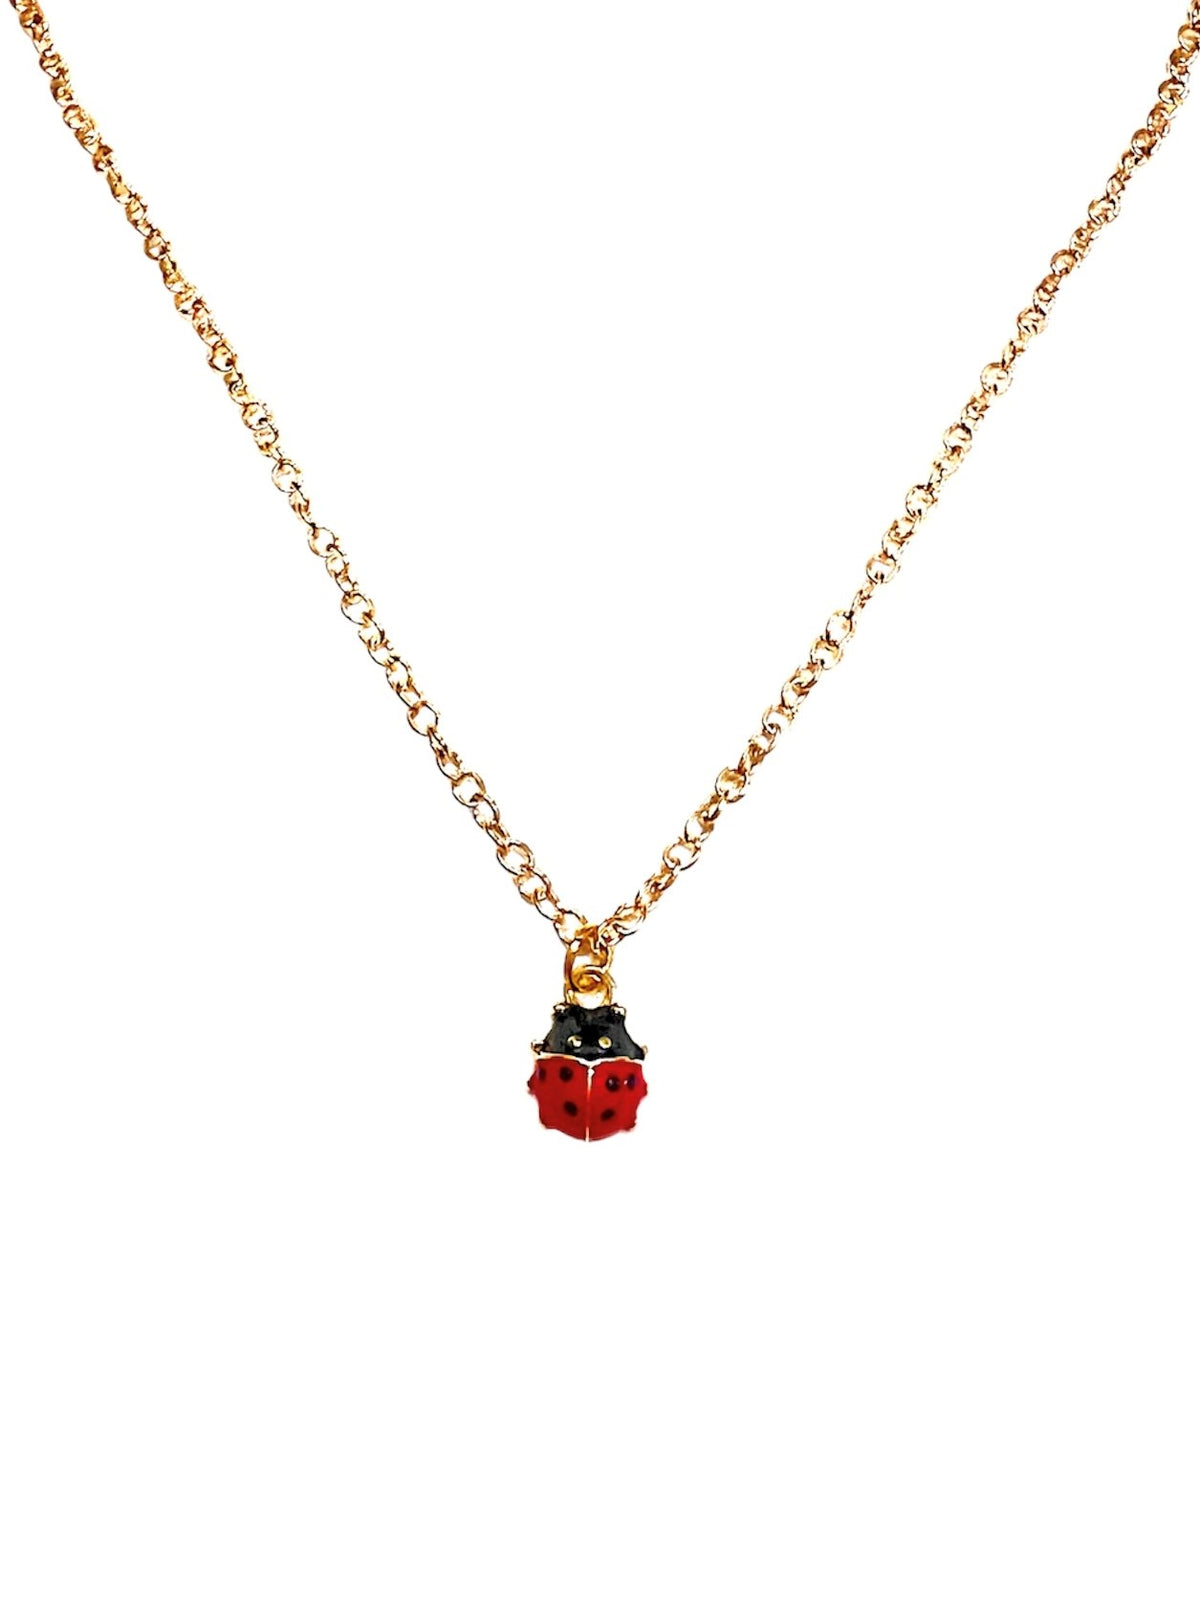 Ladybug Message Necklace| you are Extraordinary